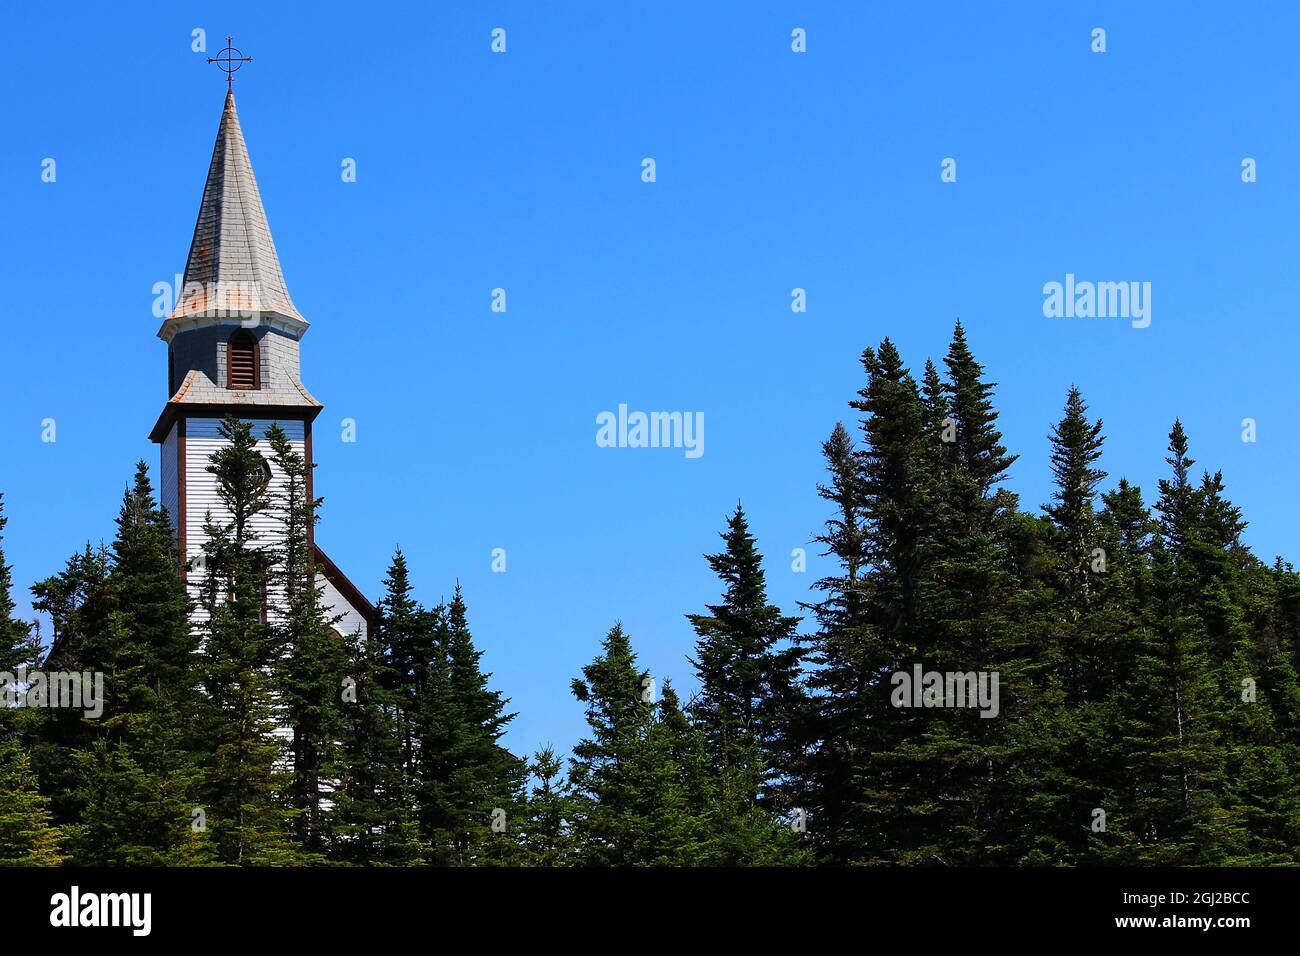 A church steeple, from an old, wooden, rural church, rising above the trees. Stock Photo